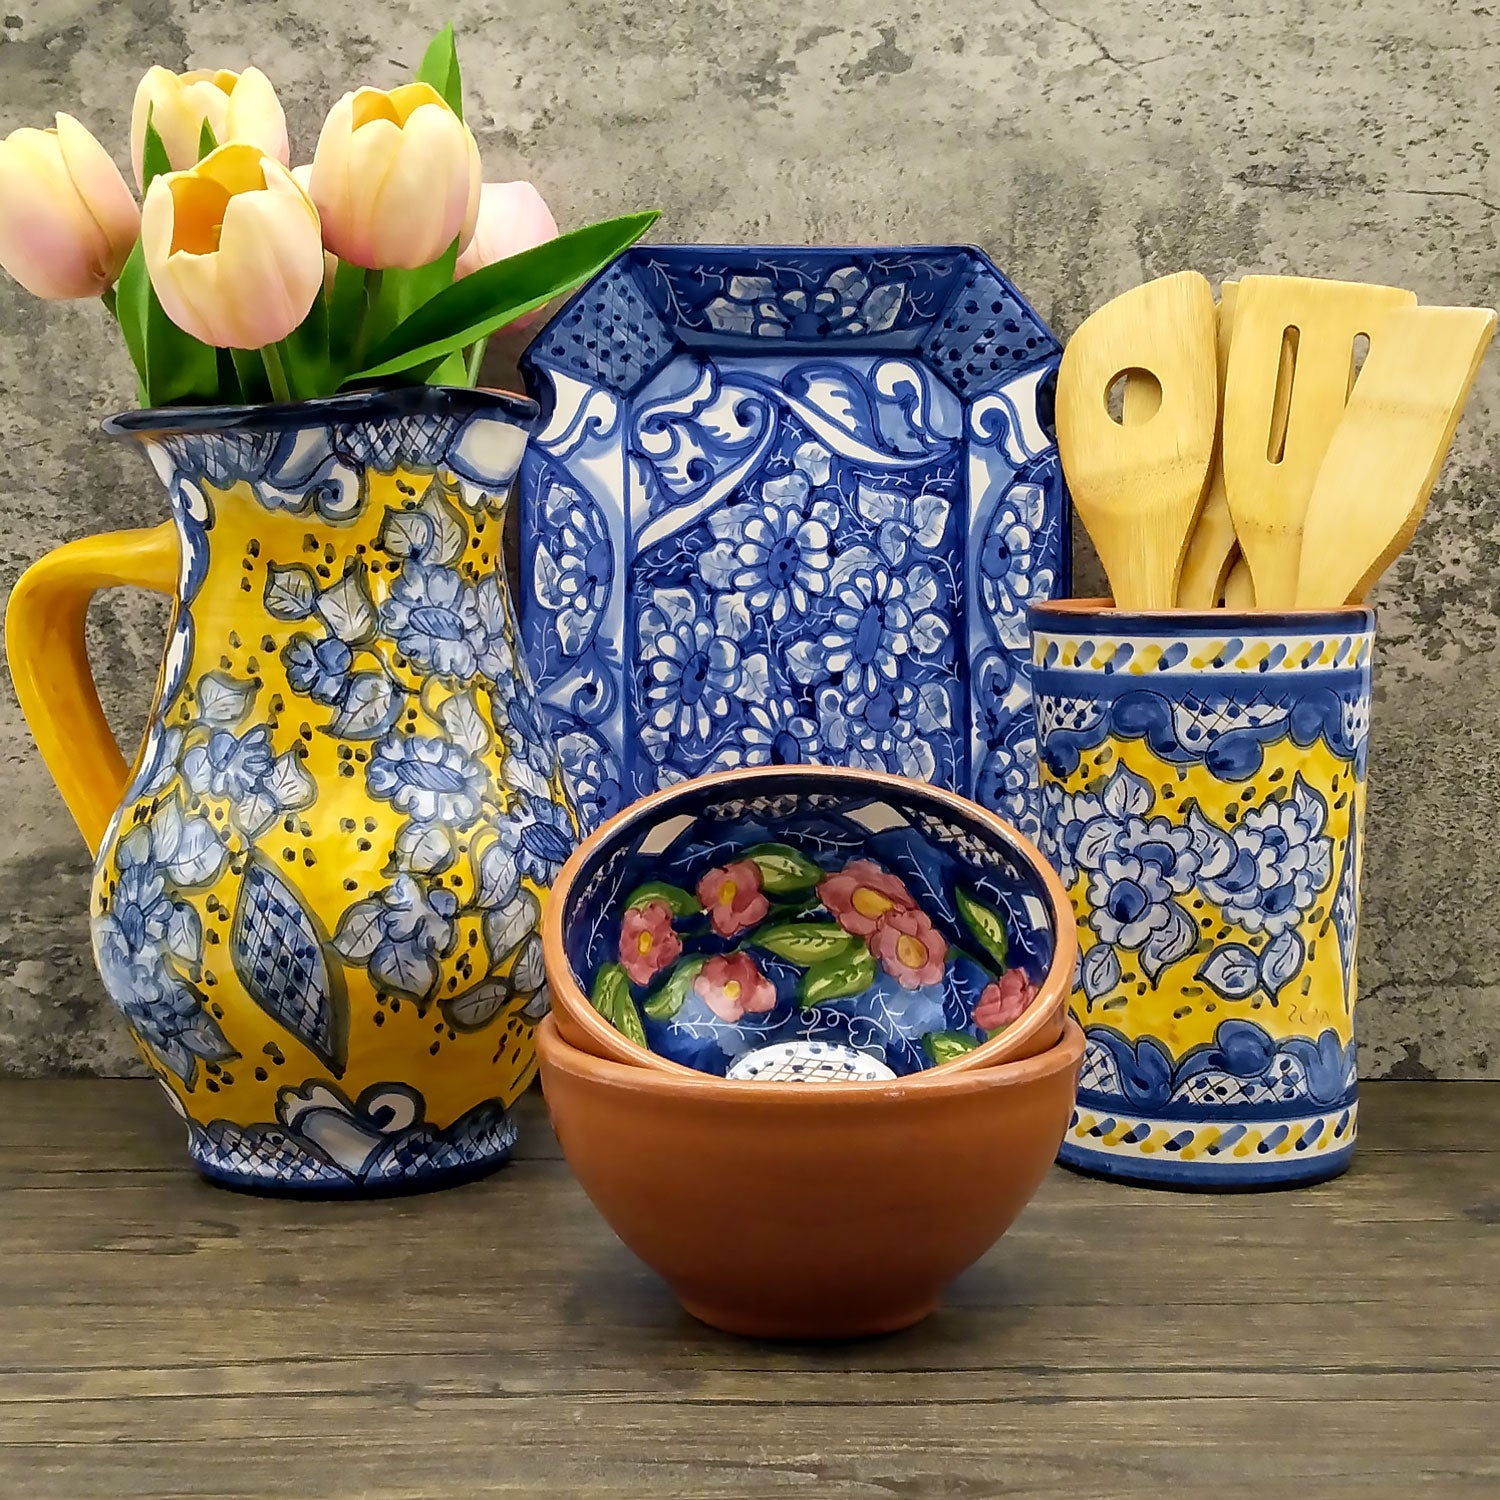 Floral traditional Portuguese pottery from Alentejo